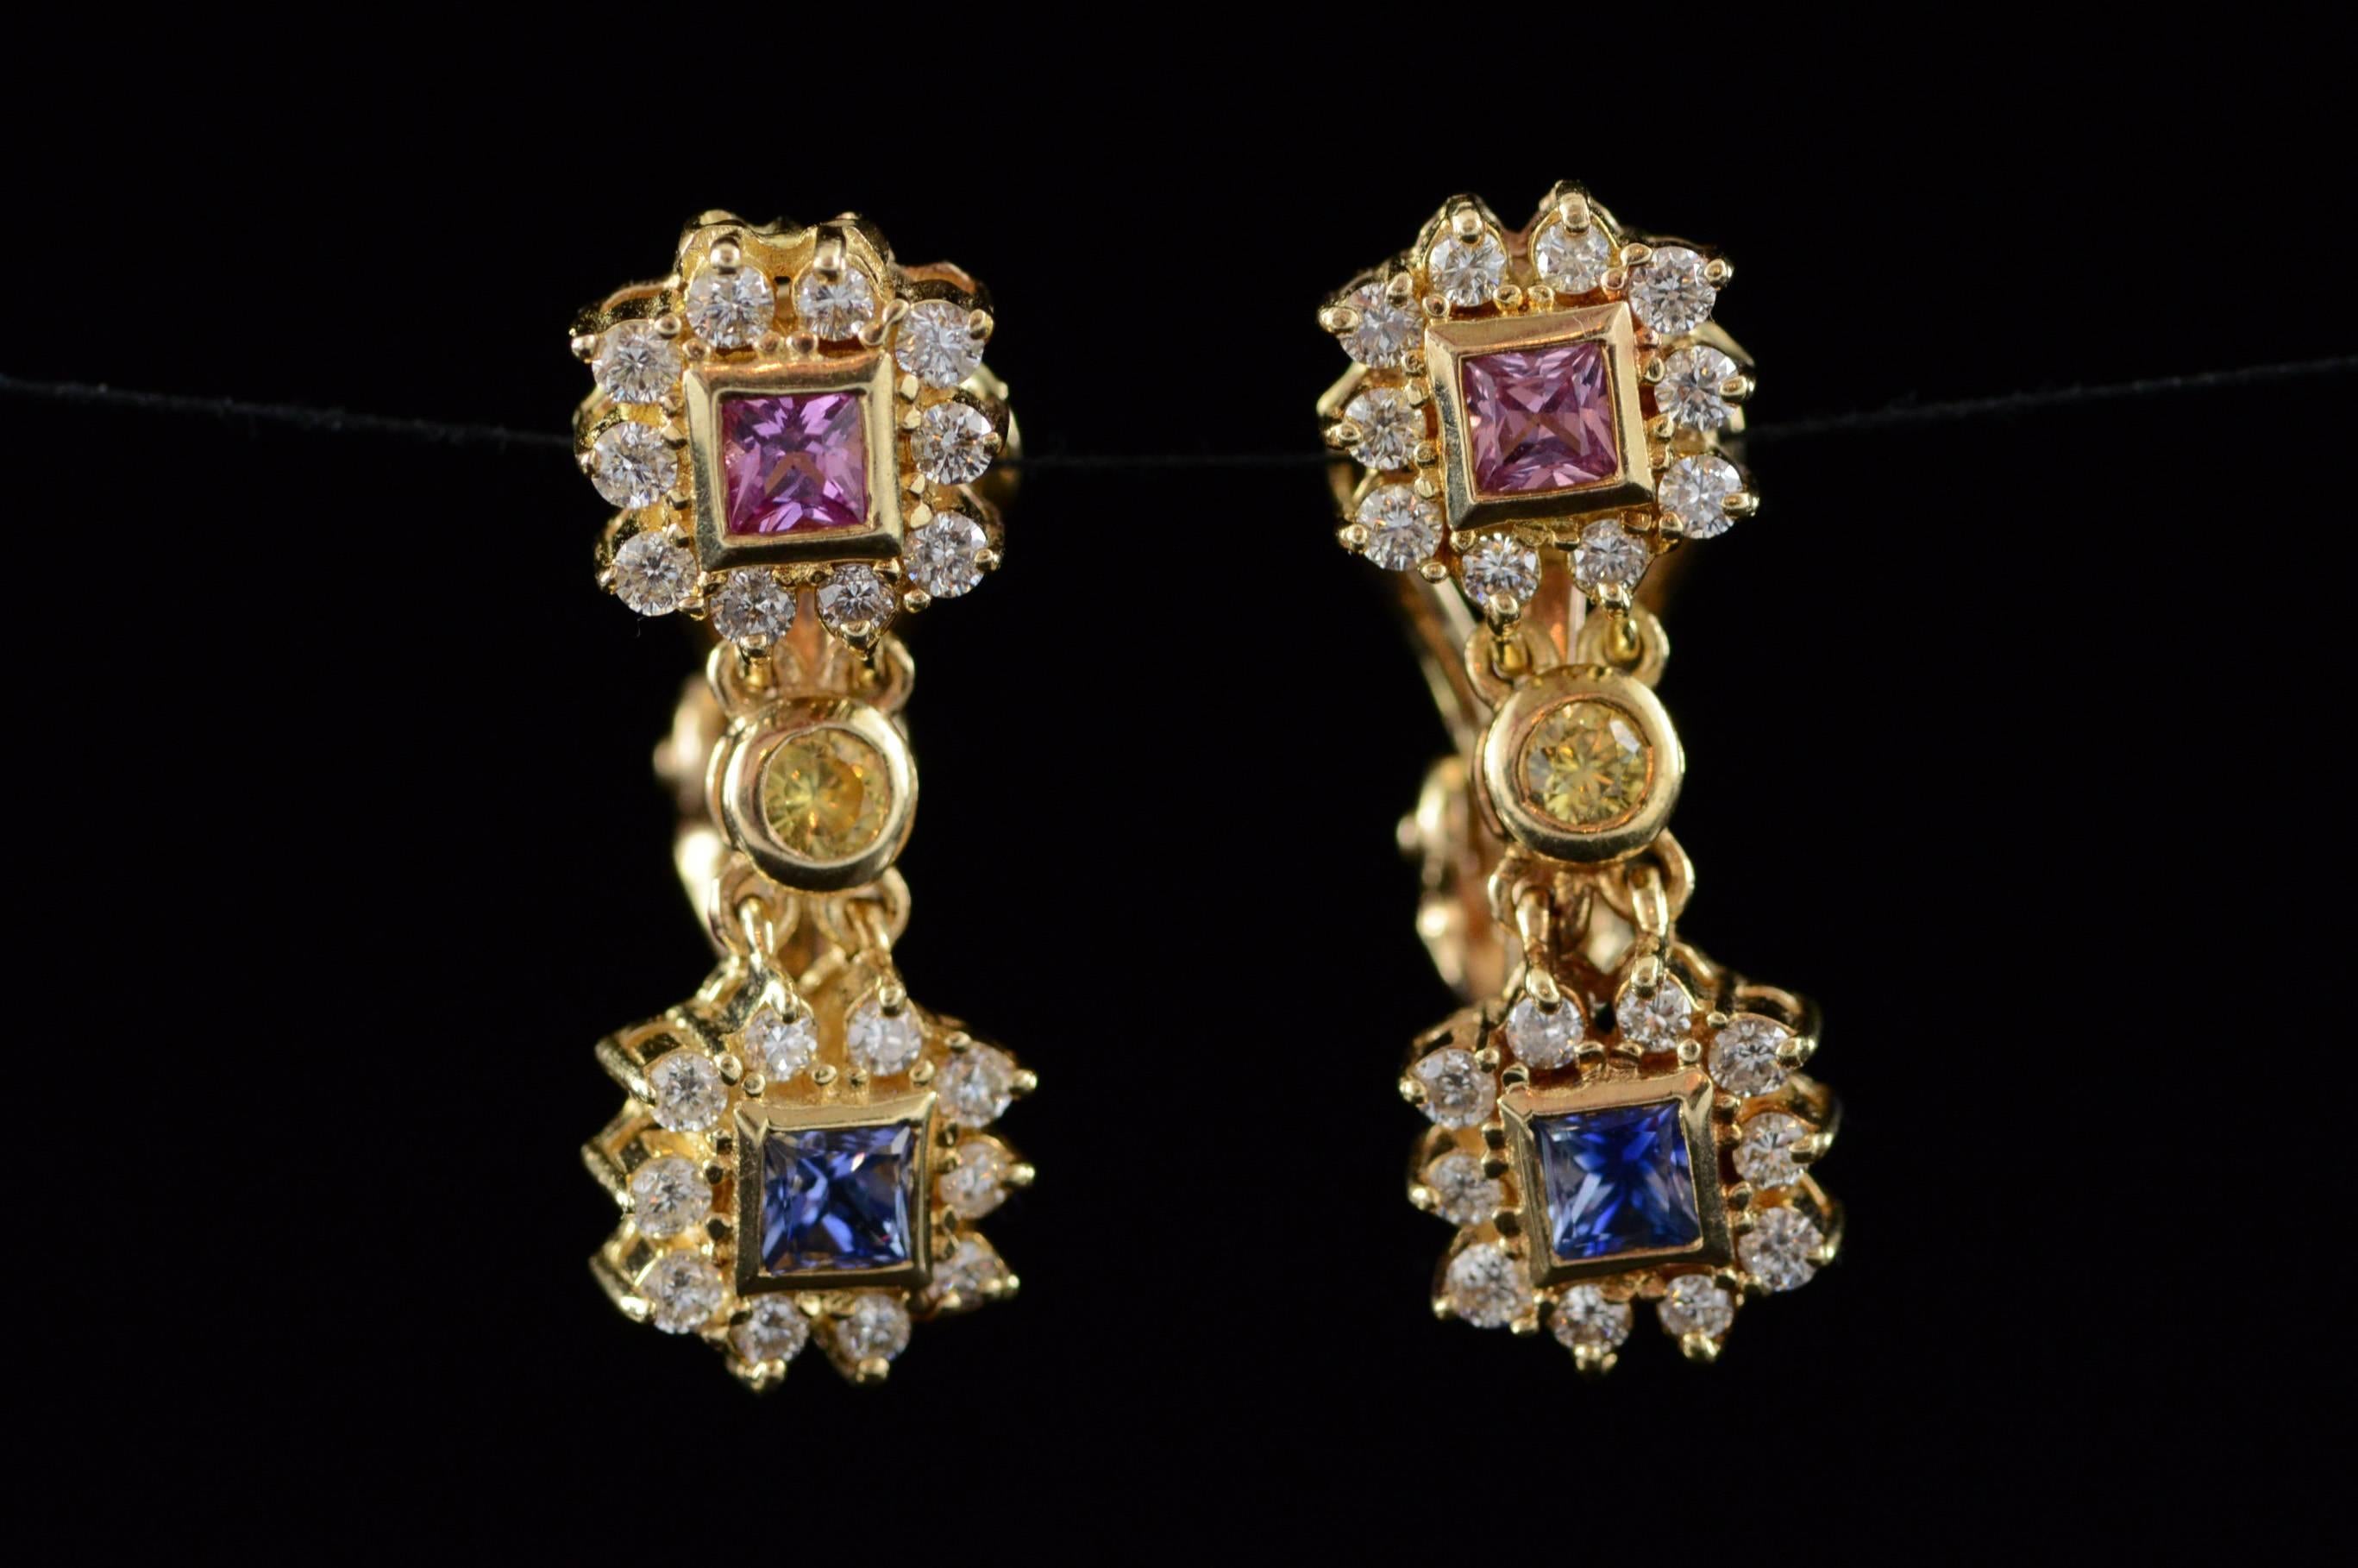 All diamonds are graded according to GIA grading standards.

·Item: 14K 1.29 Ctw Diamond Sapphire French Clip Earrings Yellow Gold

·Era: Modern / 1990s

·Composition: 14k Gold Marked / Tested

·Gem Stone: 6x Multi Colored Sapphires=